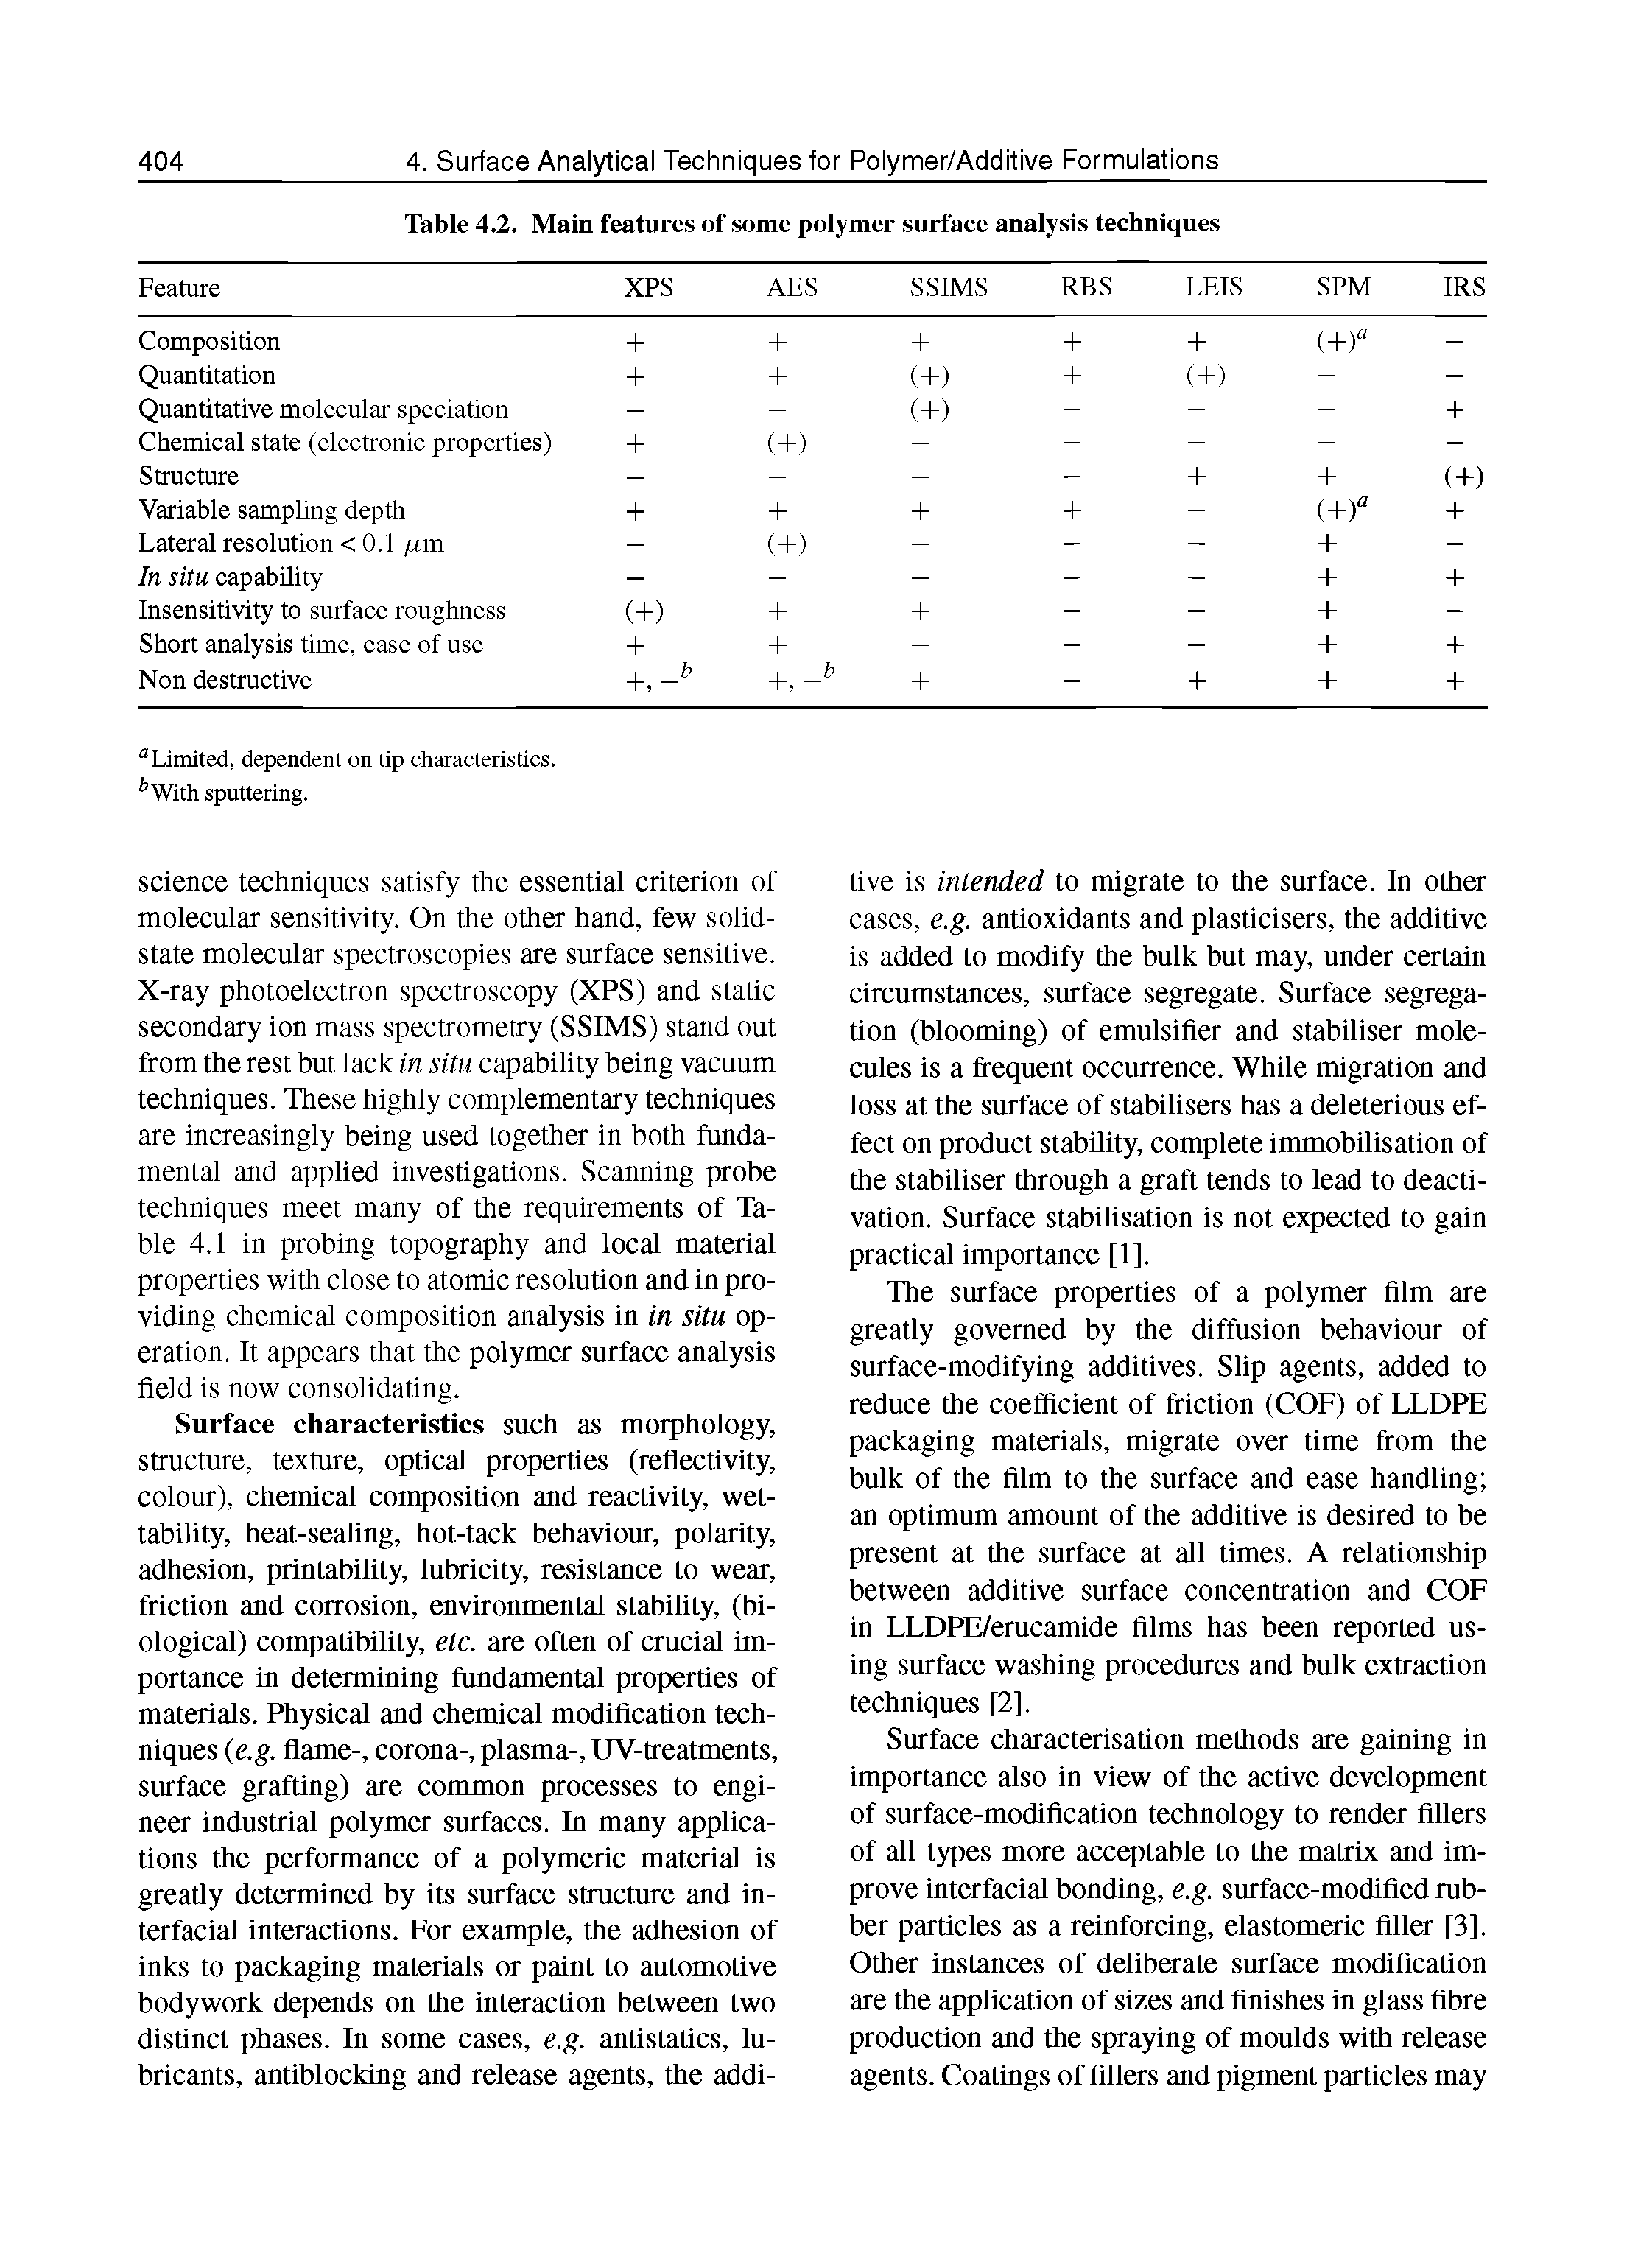 Table 4.2. Main features of some polymer surface analysis techniques ...